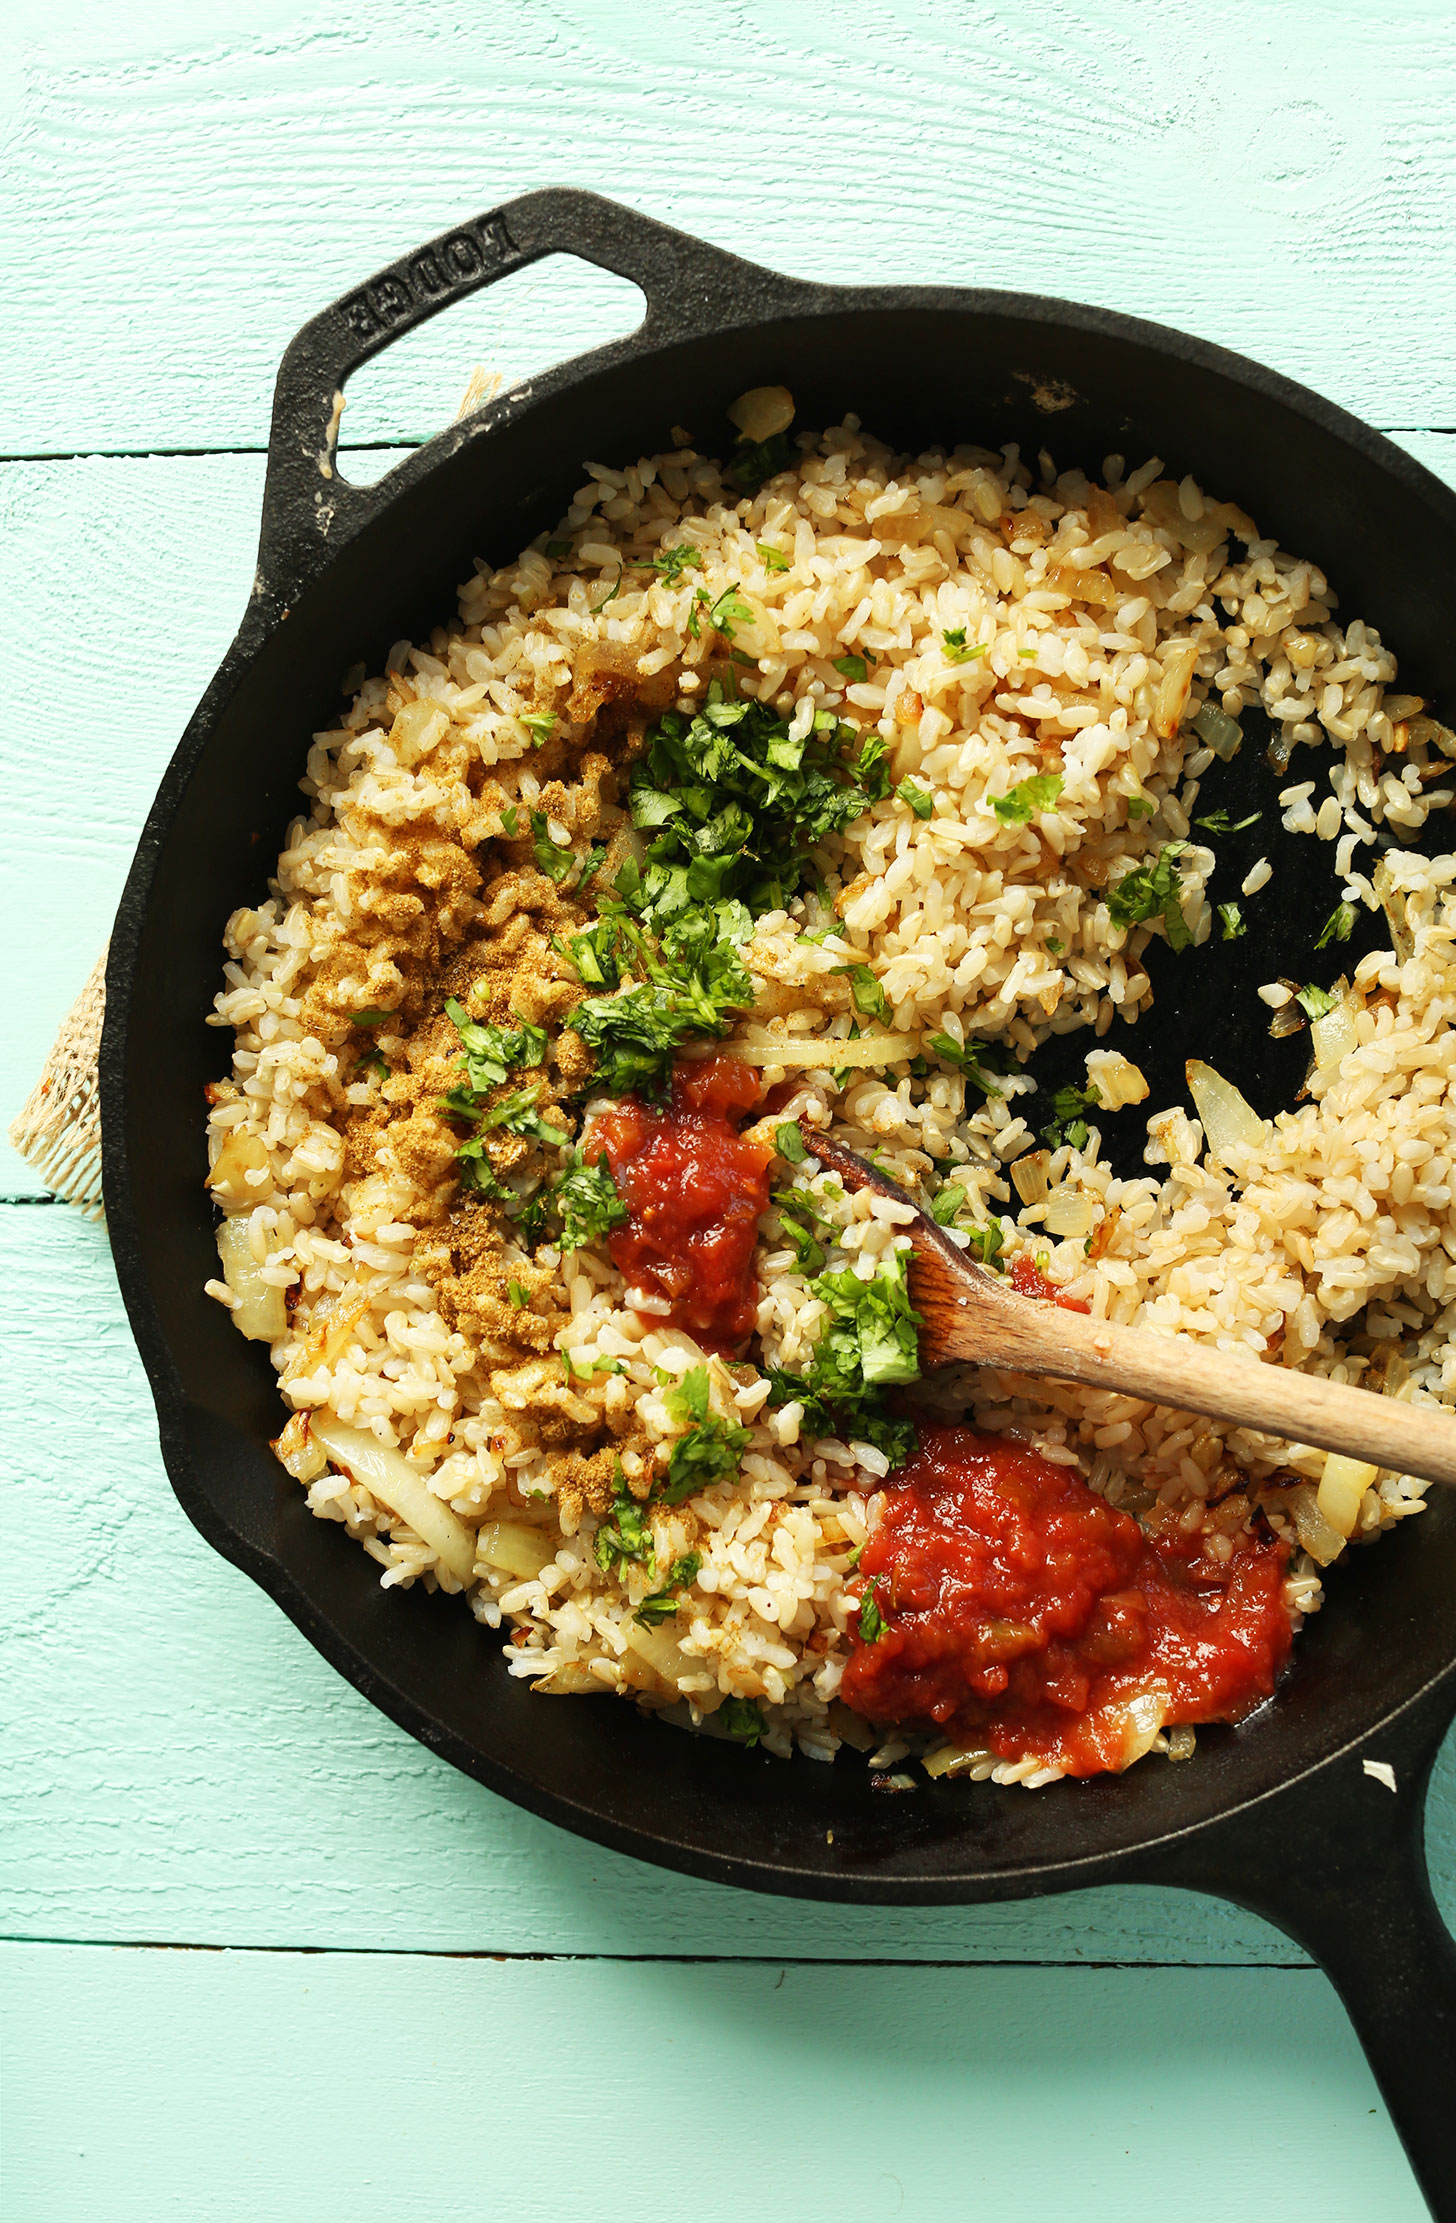 Mixing rice and seasonings in a cast-iron skillet